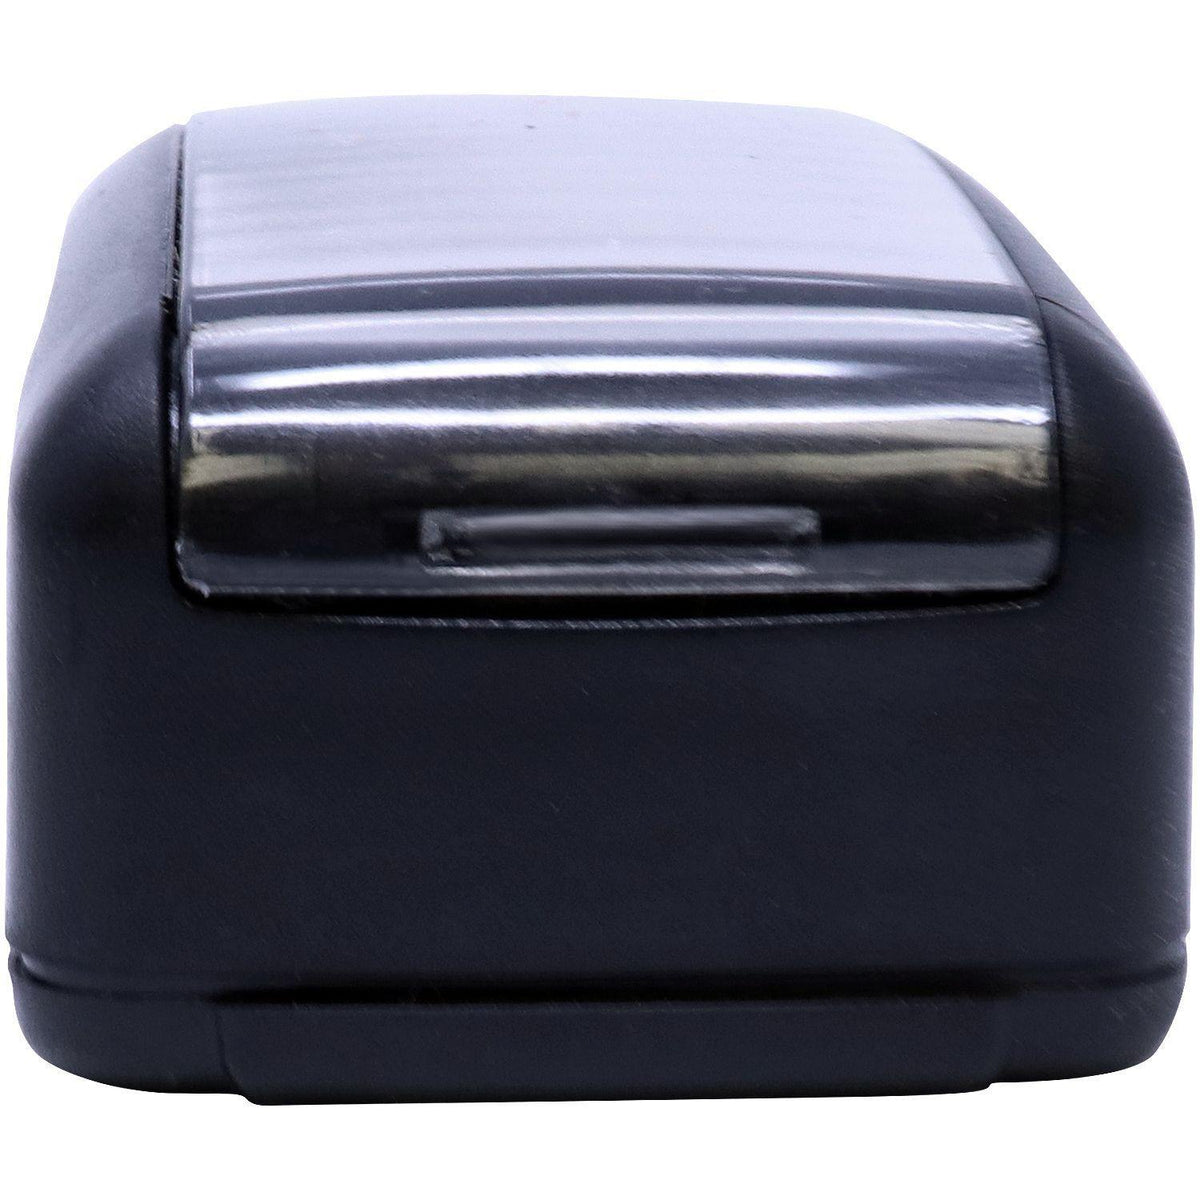 Large Pre Inked First Class Stamp Side View